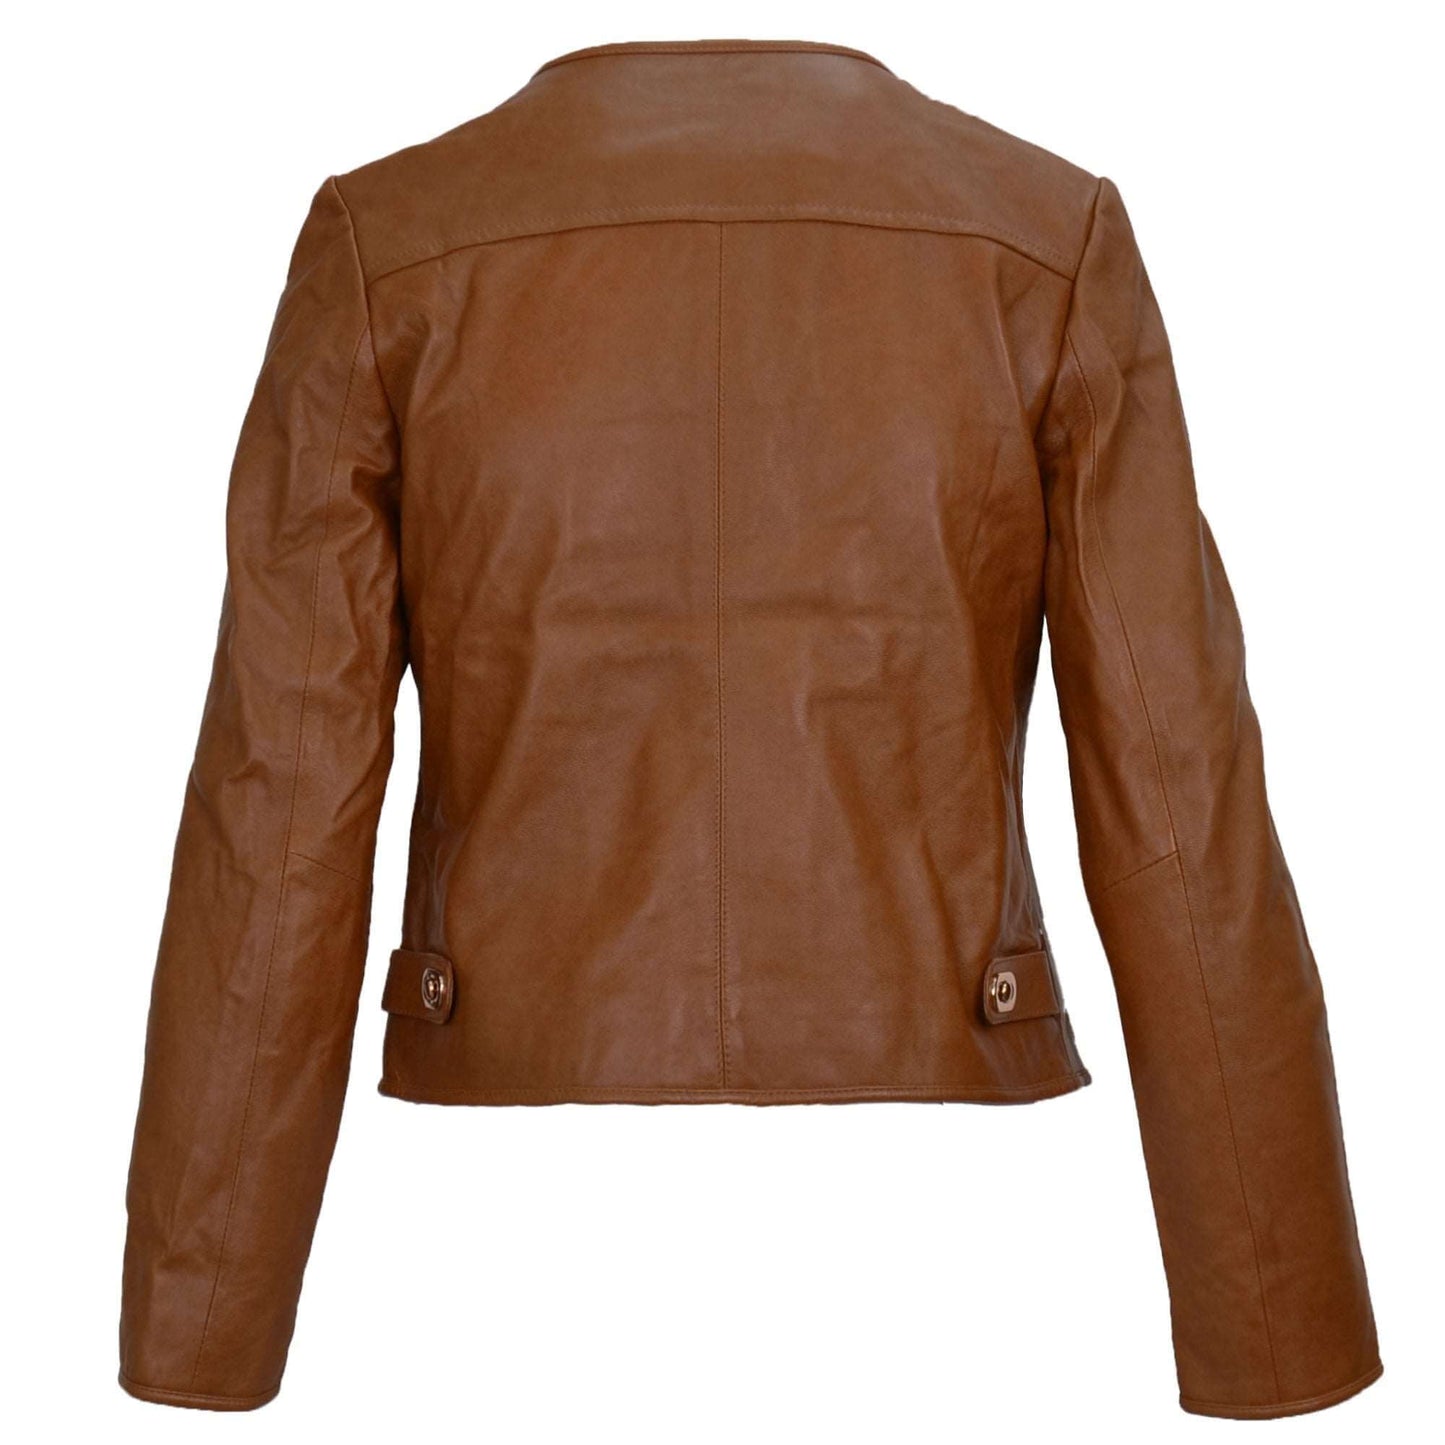 Gold Buckle Soft Leather Jacket